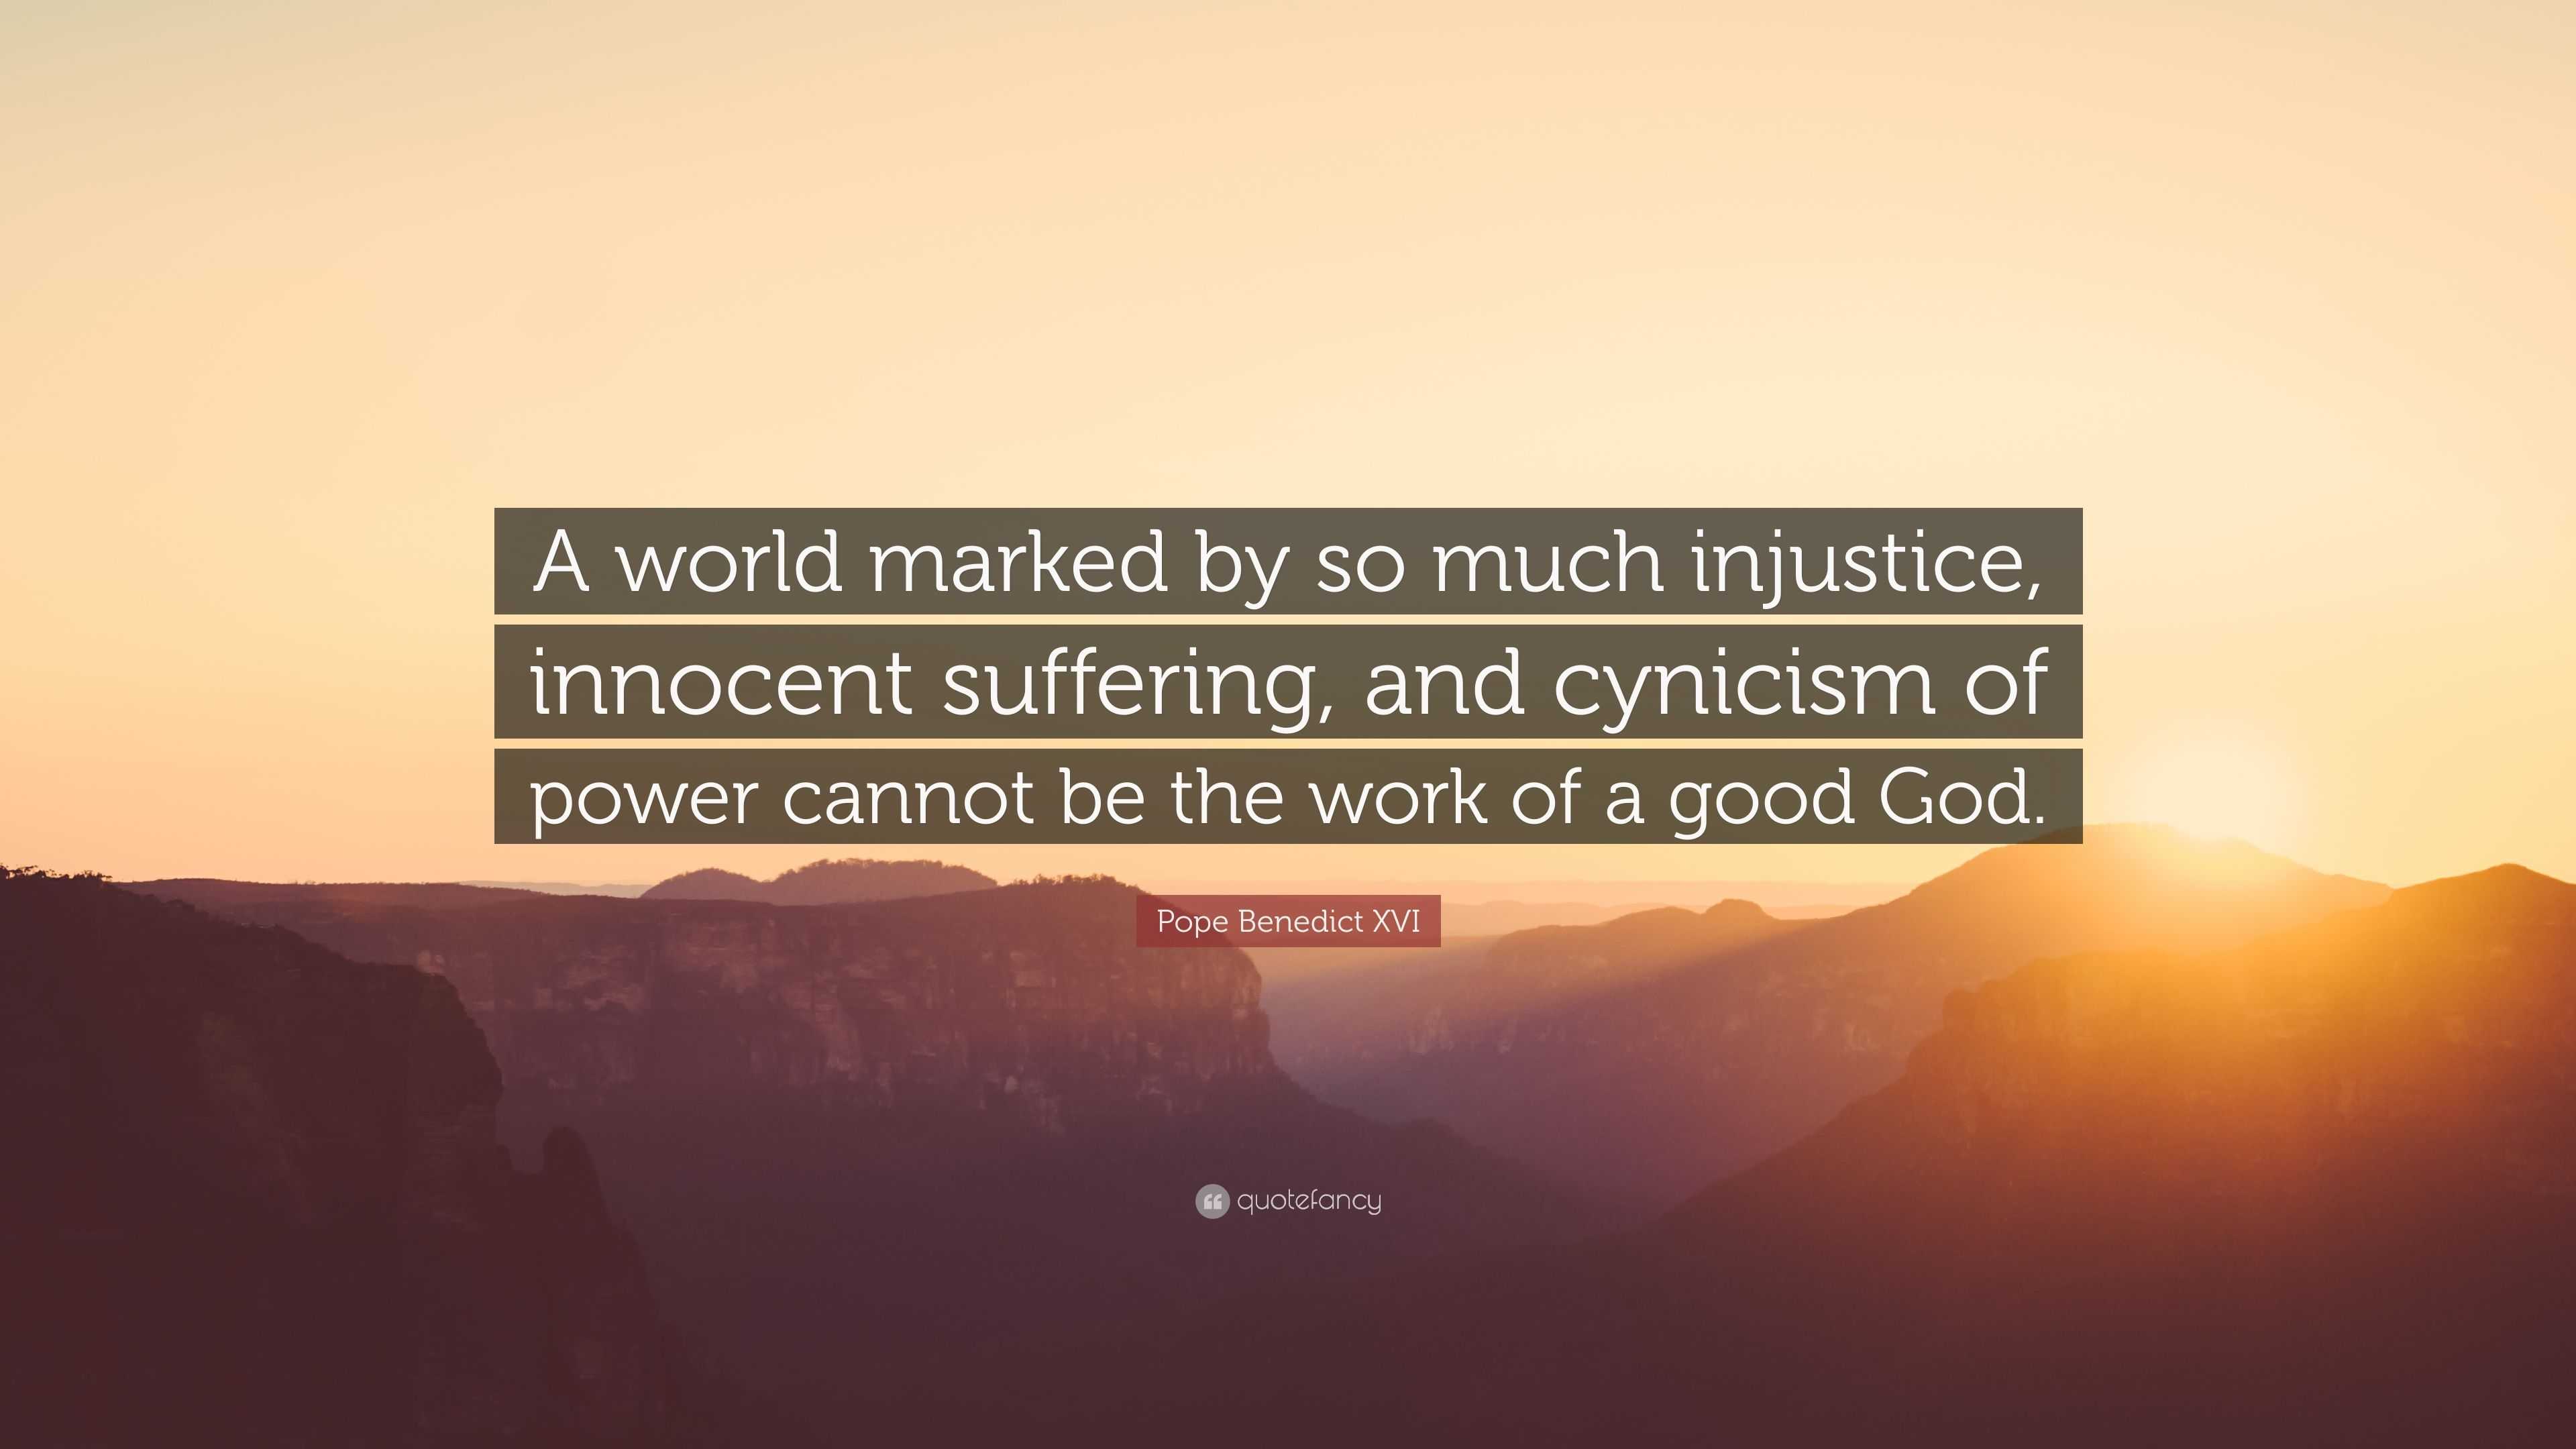 Pope Benedict XVI Quote: “A world marked by so much injustice, innocent  suffering, and cynicism of